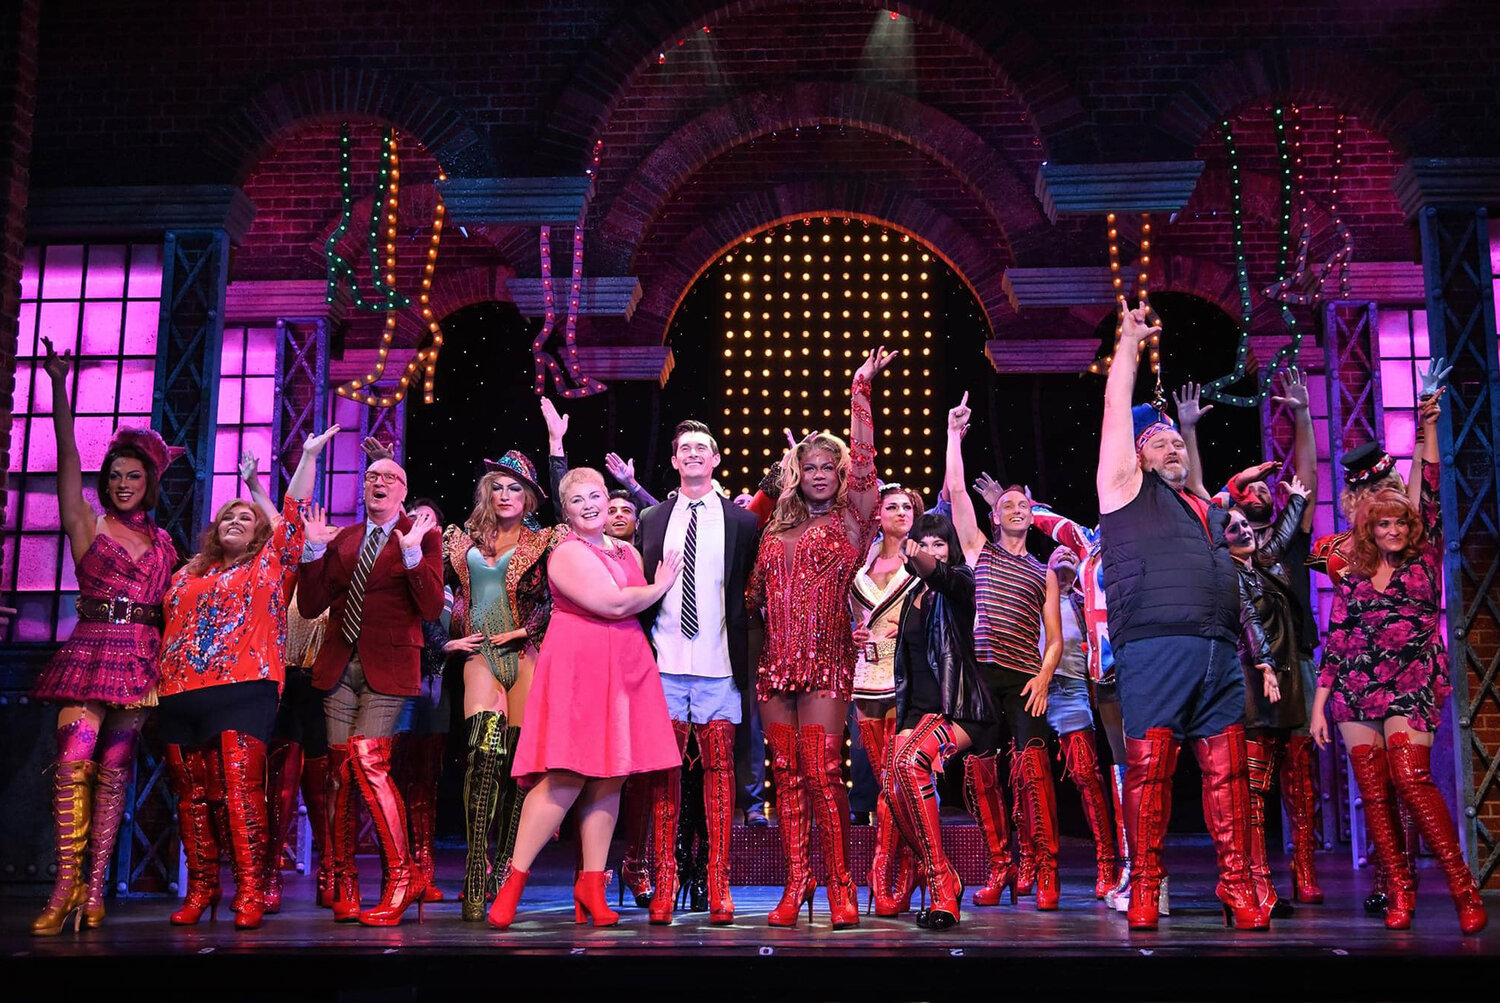 Last year’s production of Kinky Boots at Theatre by the Sea